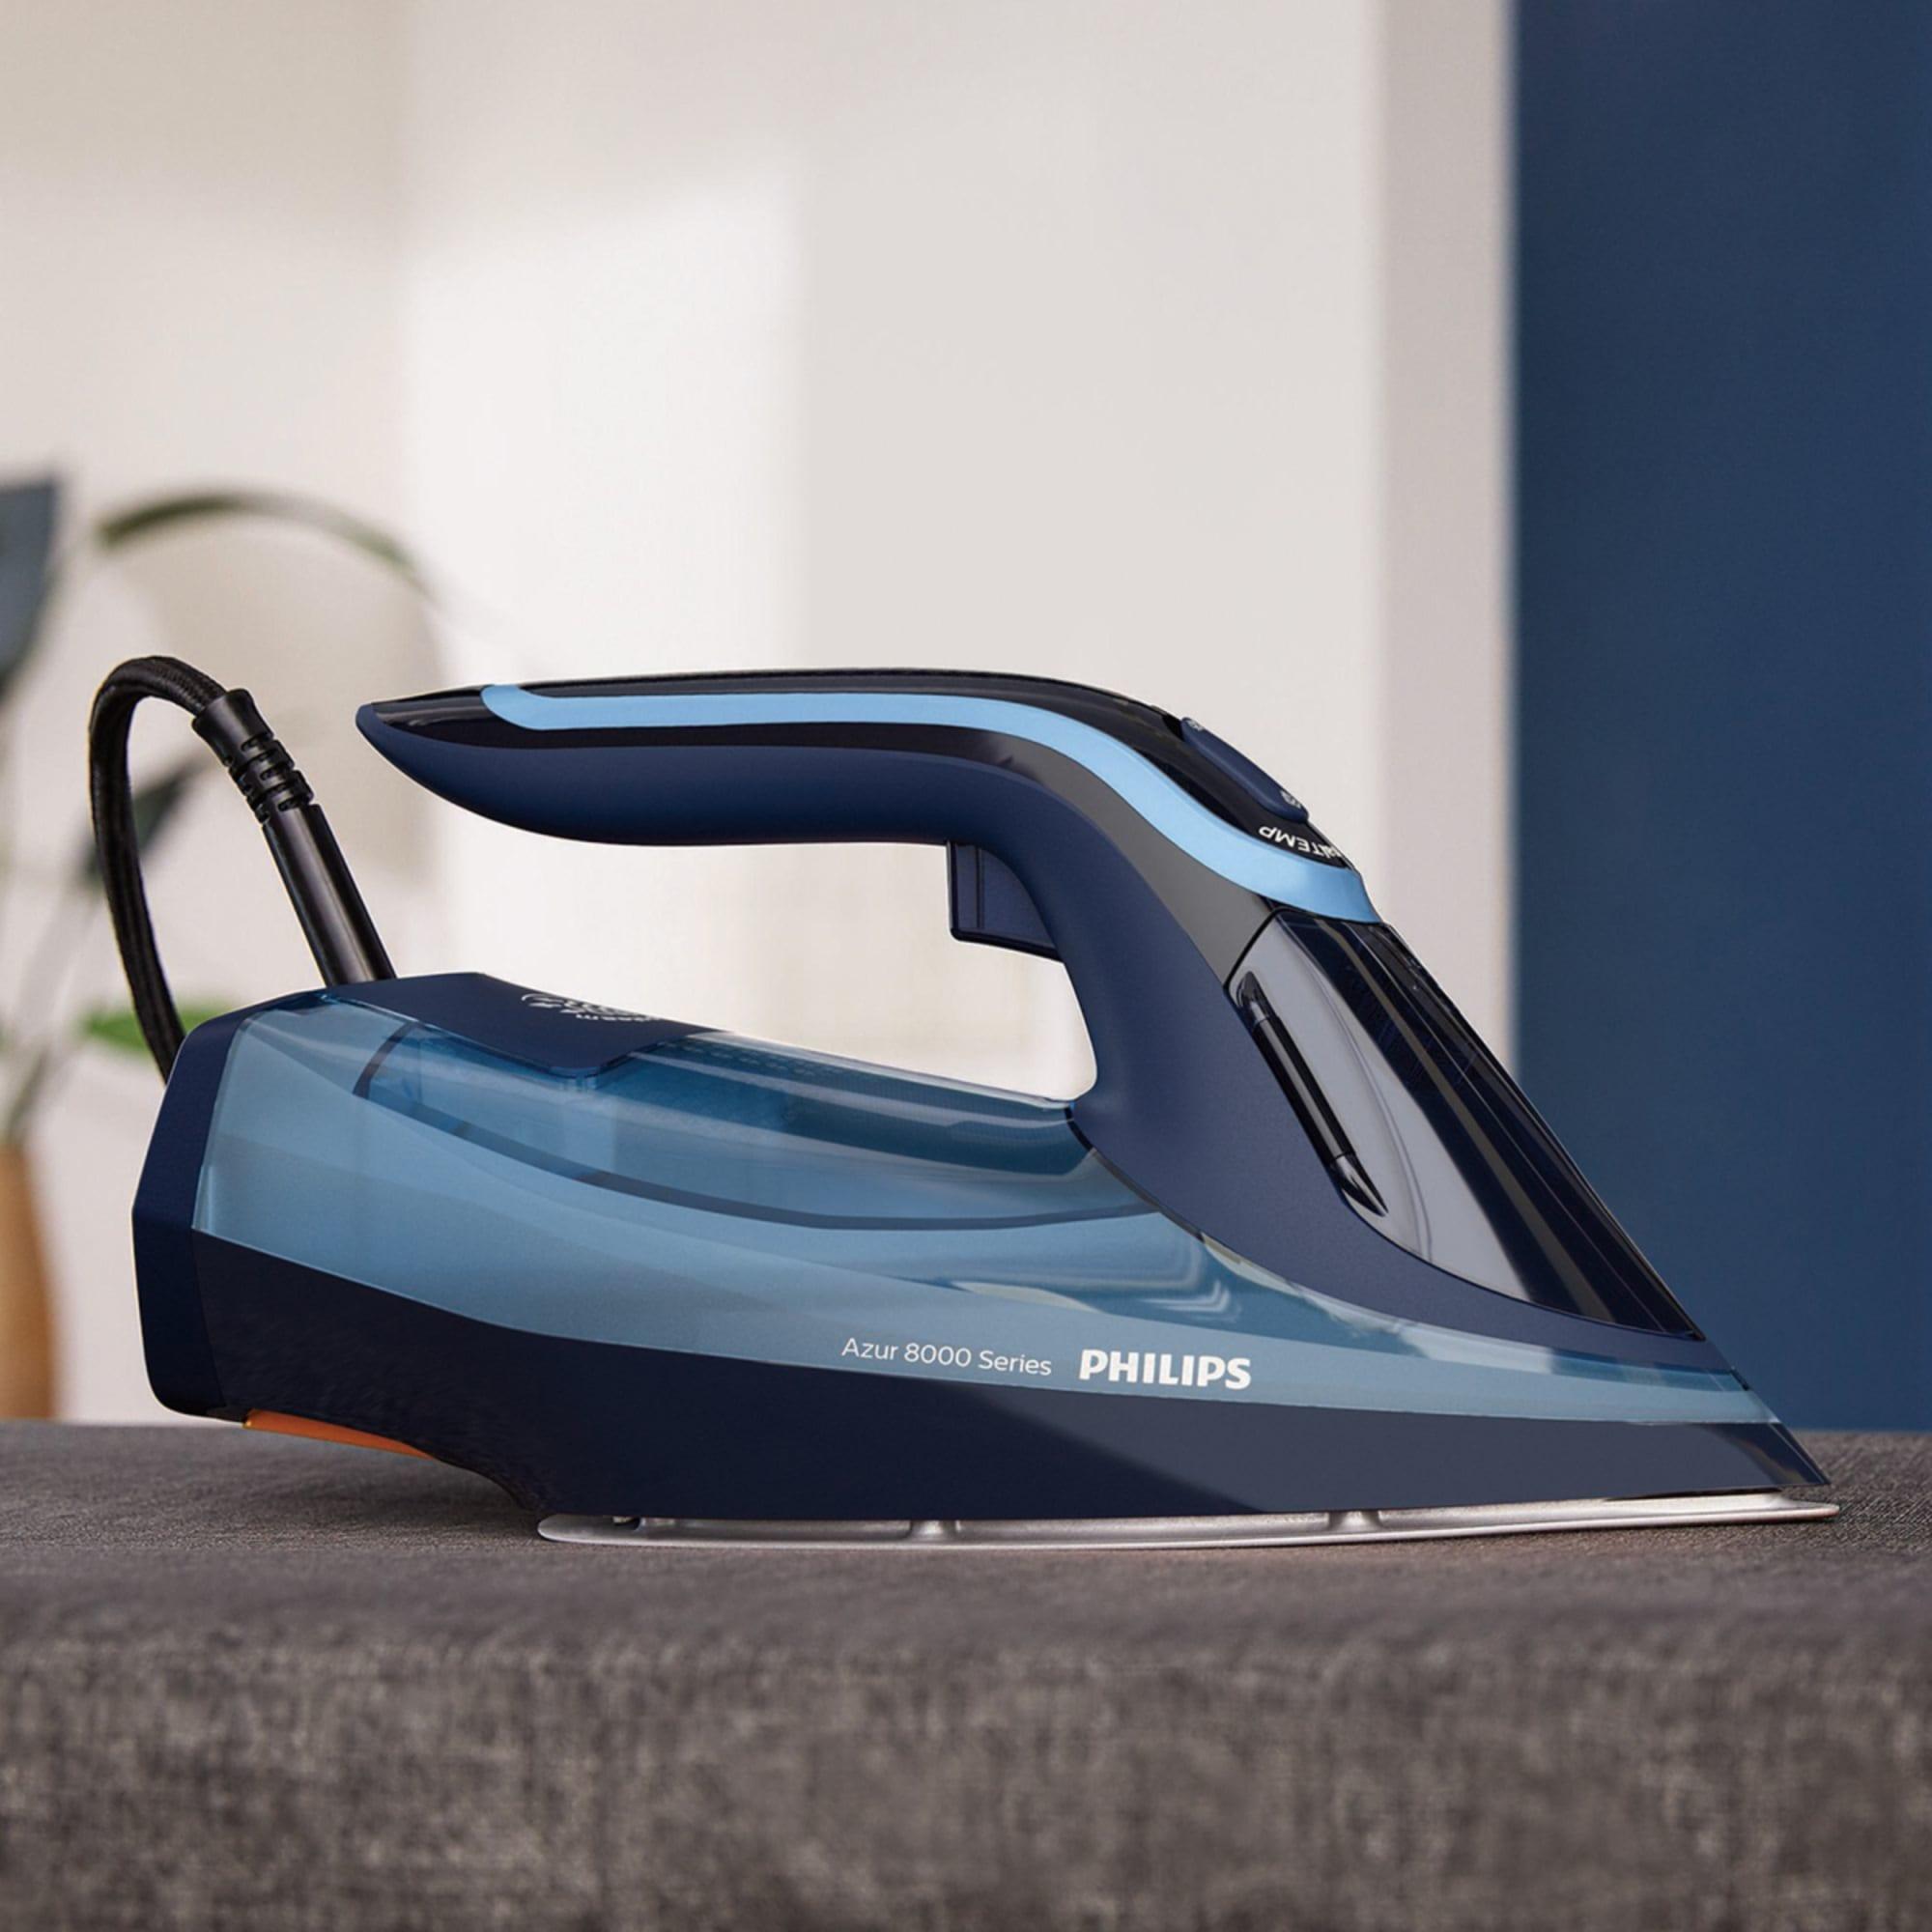 Philips 8000 Series DST8020/20 Steam Iron Blue Image 8